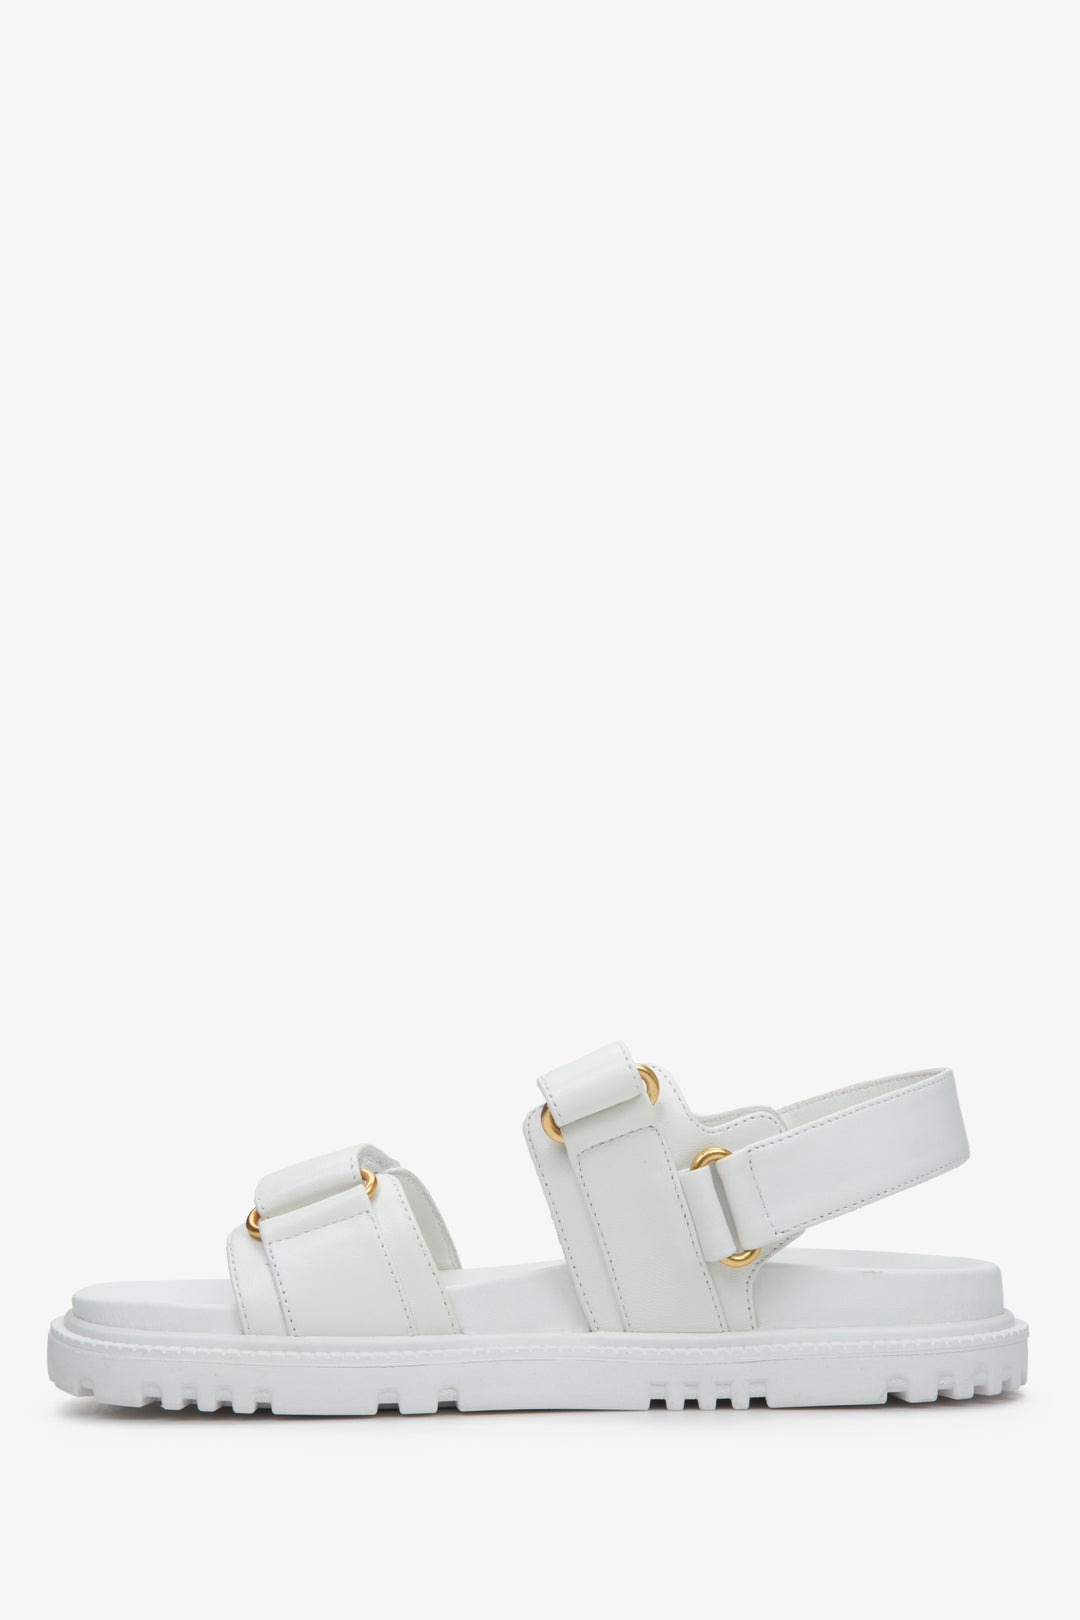 Estro women's white leather sandals with a flexible sole and golden accents.